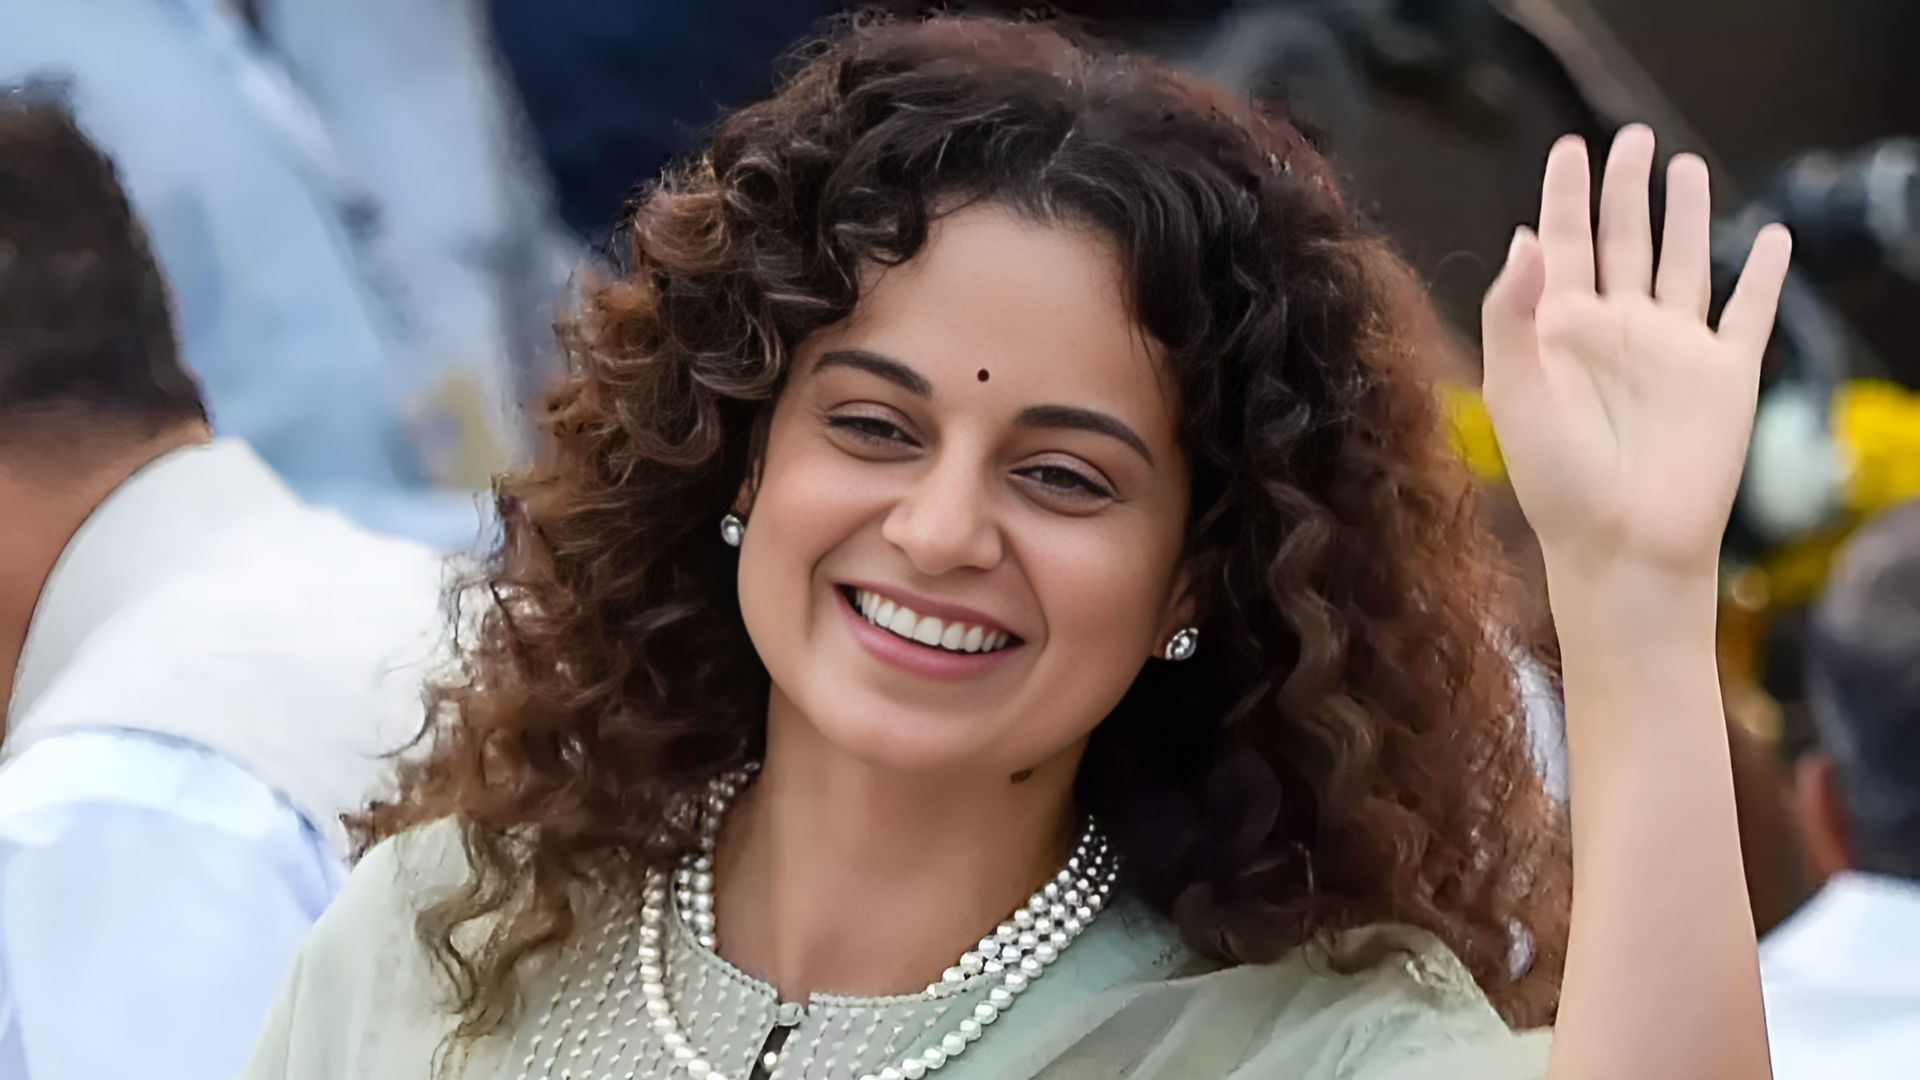 Kangana Ranaut’s Controversial Statement: Subhash Chandra Bose as India’s ‘First Prime Minister’ Sparks Debate